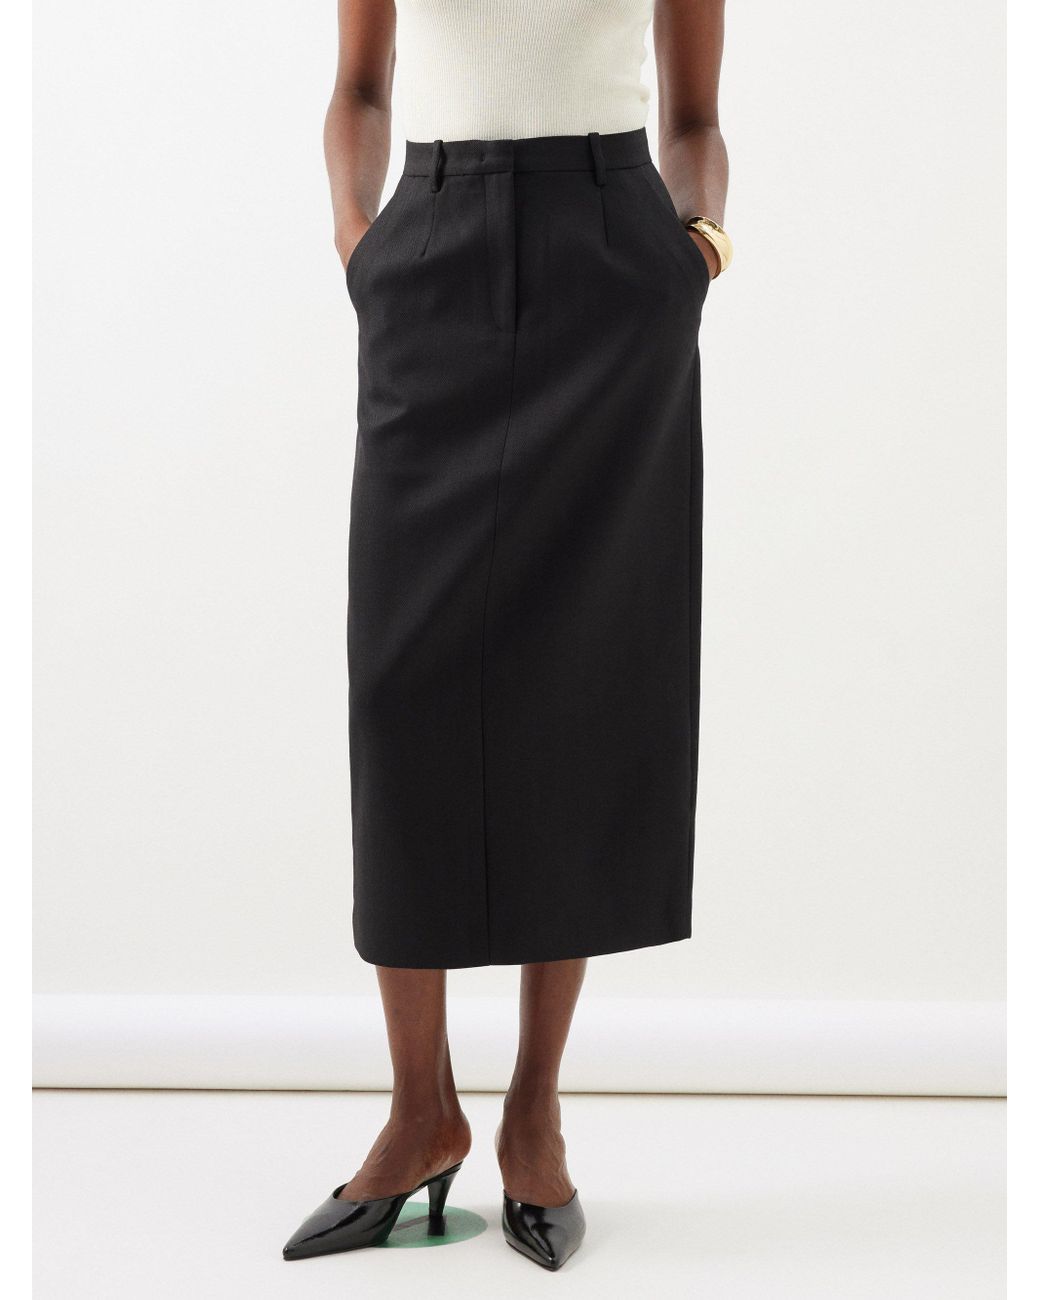 Black Tailored Work Pencil With Attached Belt Midi Skirt by You & All  Online | THE ICONIC | New Zealand